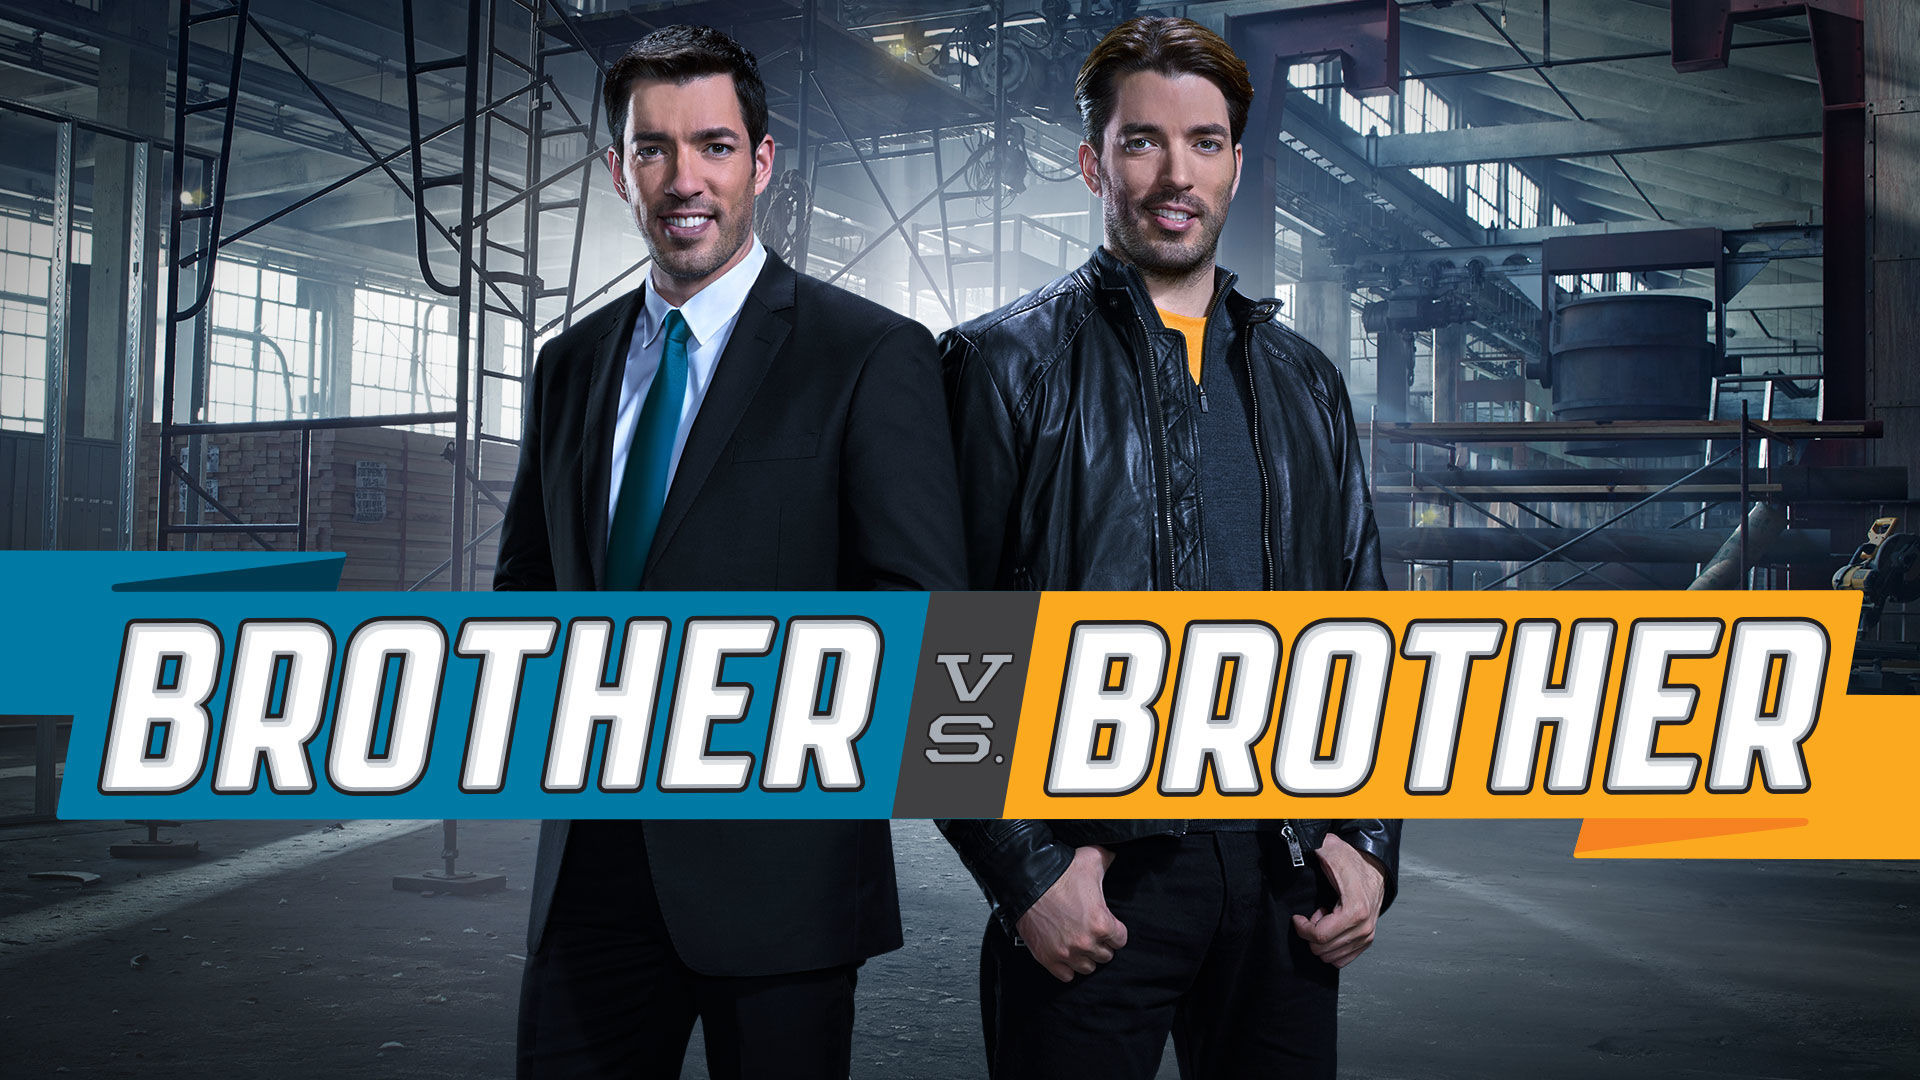 Show Brother vs. Brother